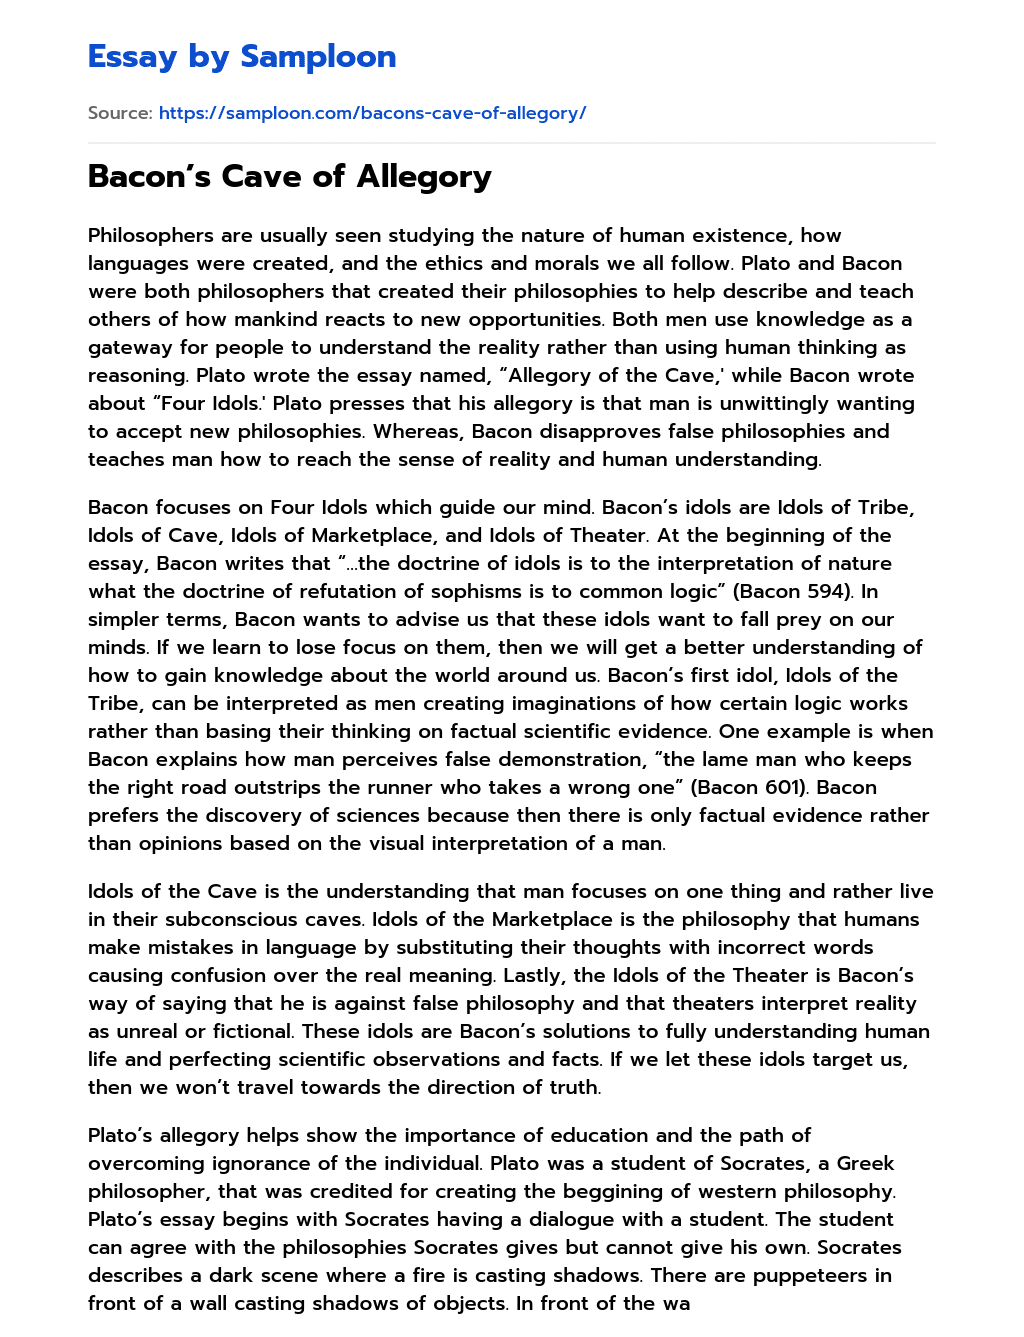 Bacon’s Cave of Allegory essay